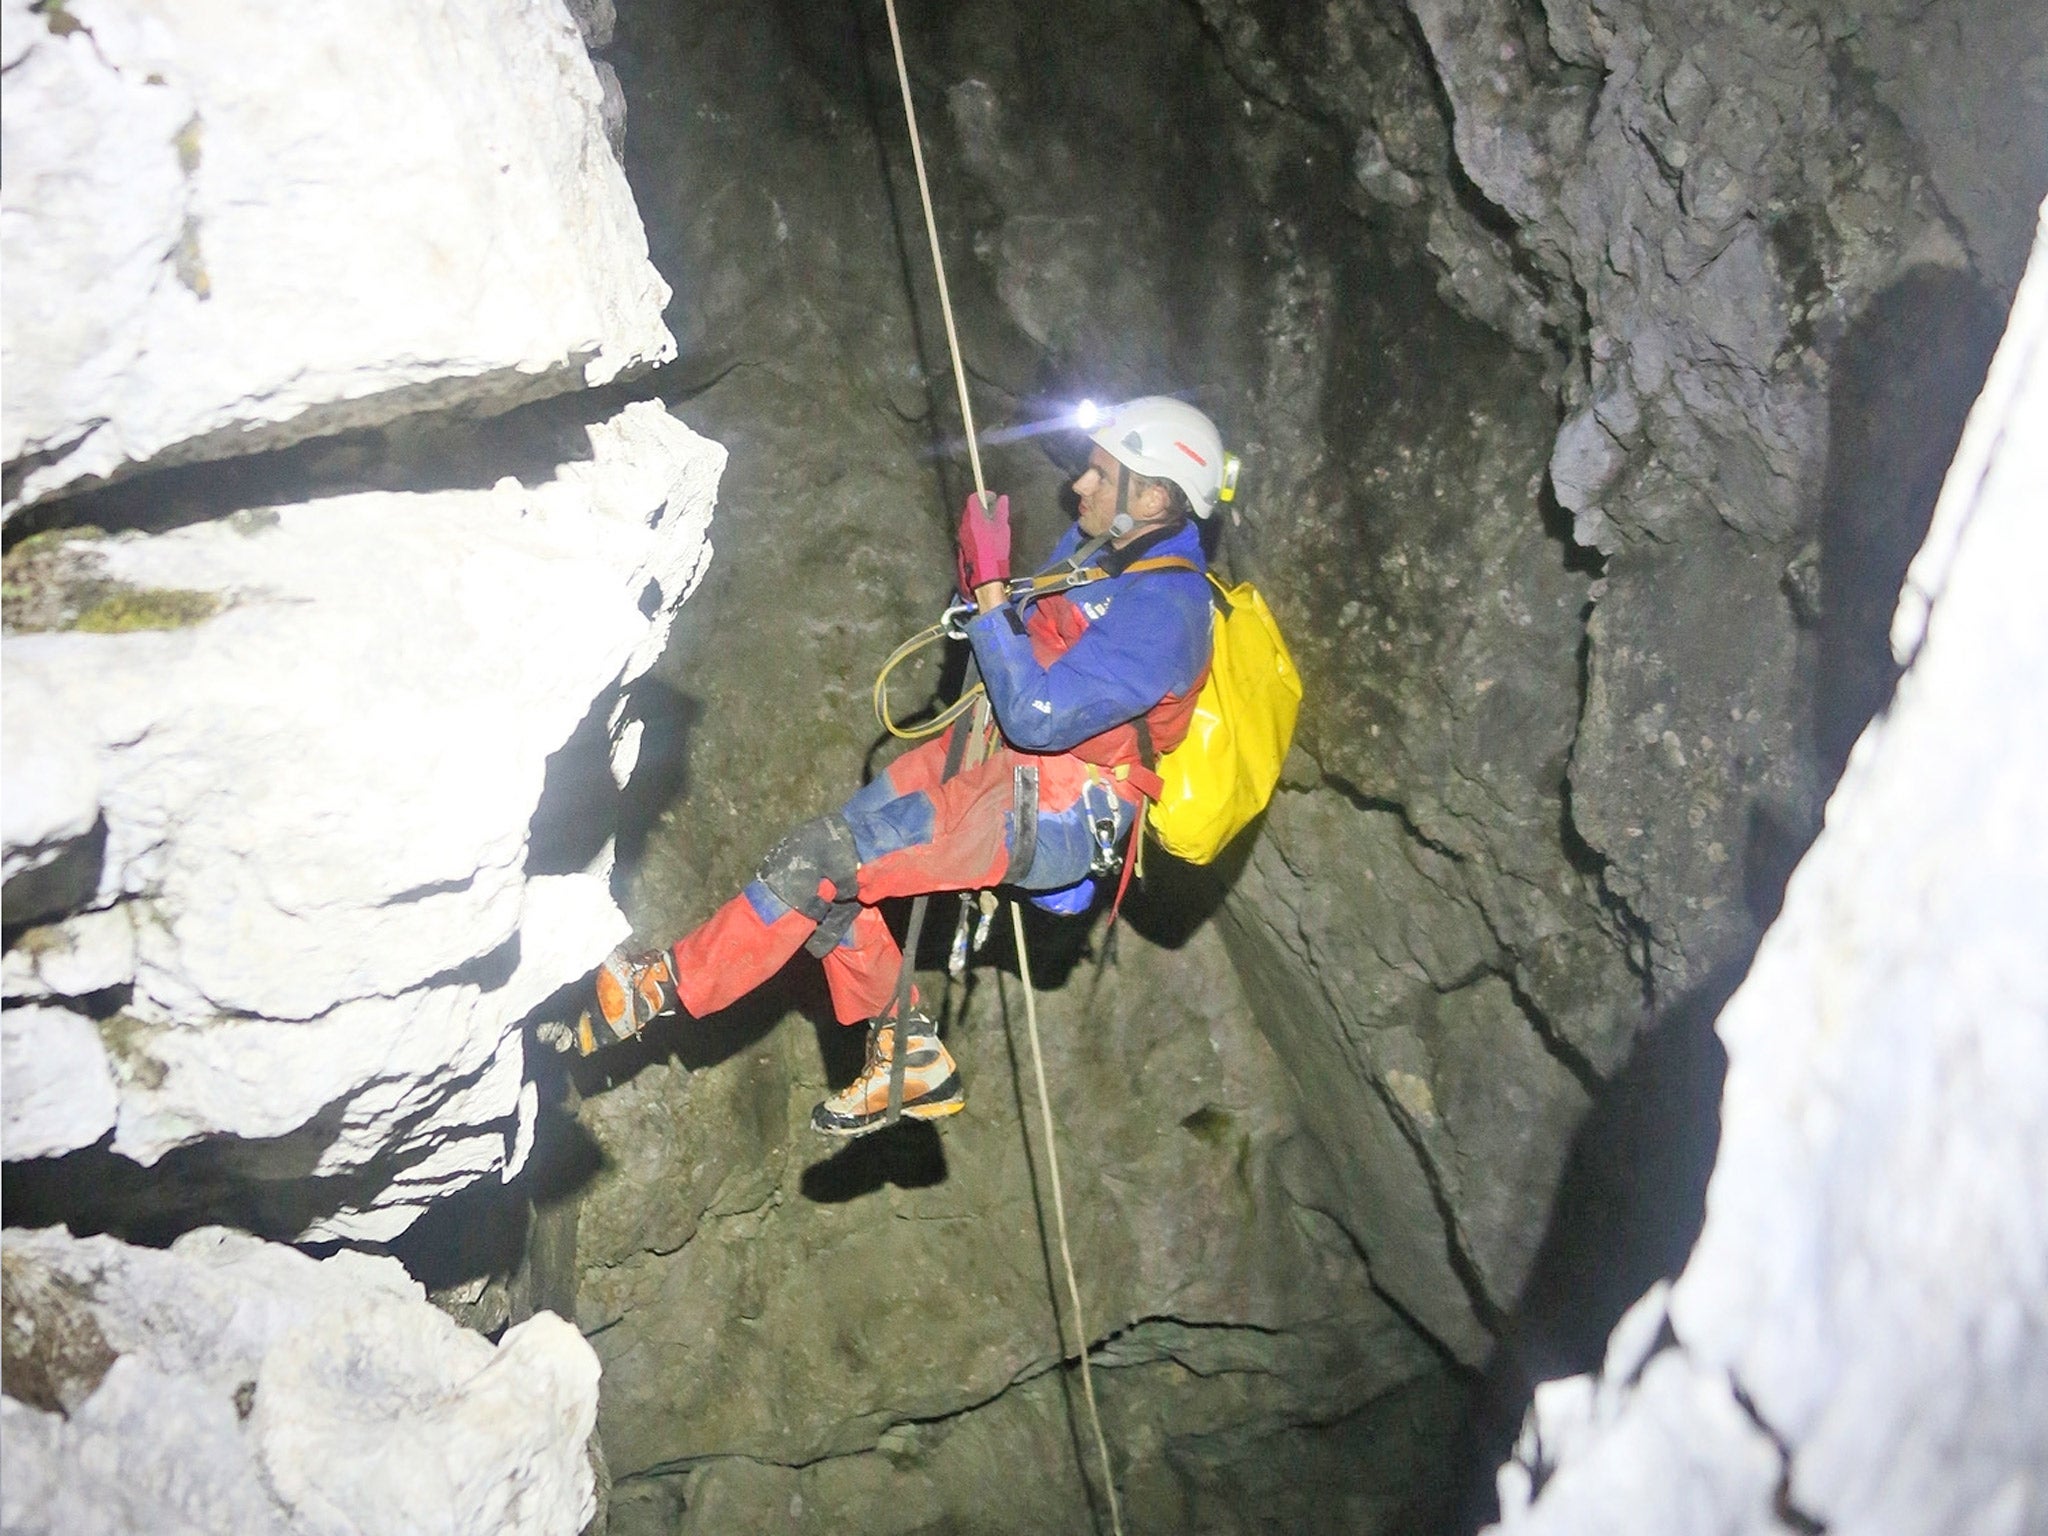 A rescuer enters a cave near Berchtesgaden, Germany